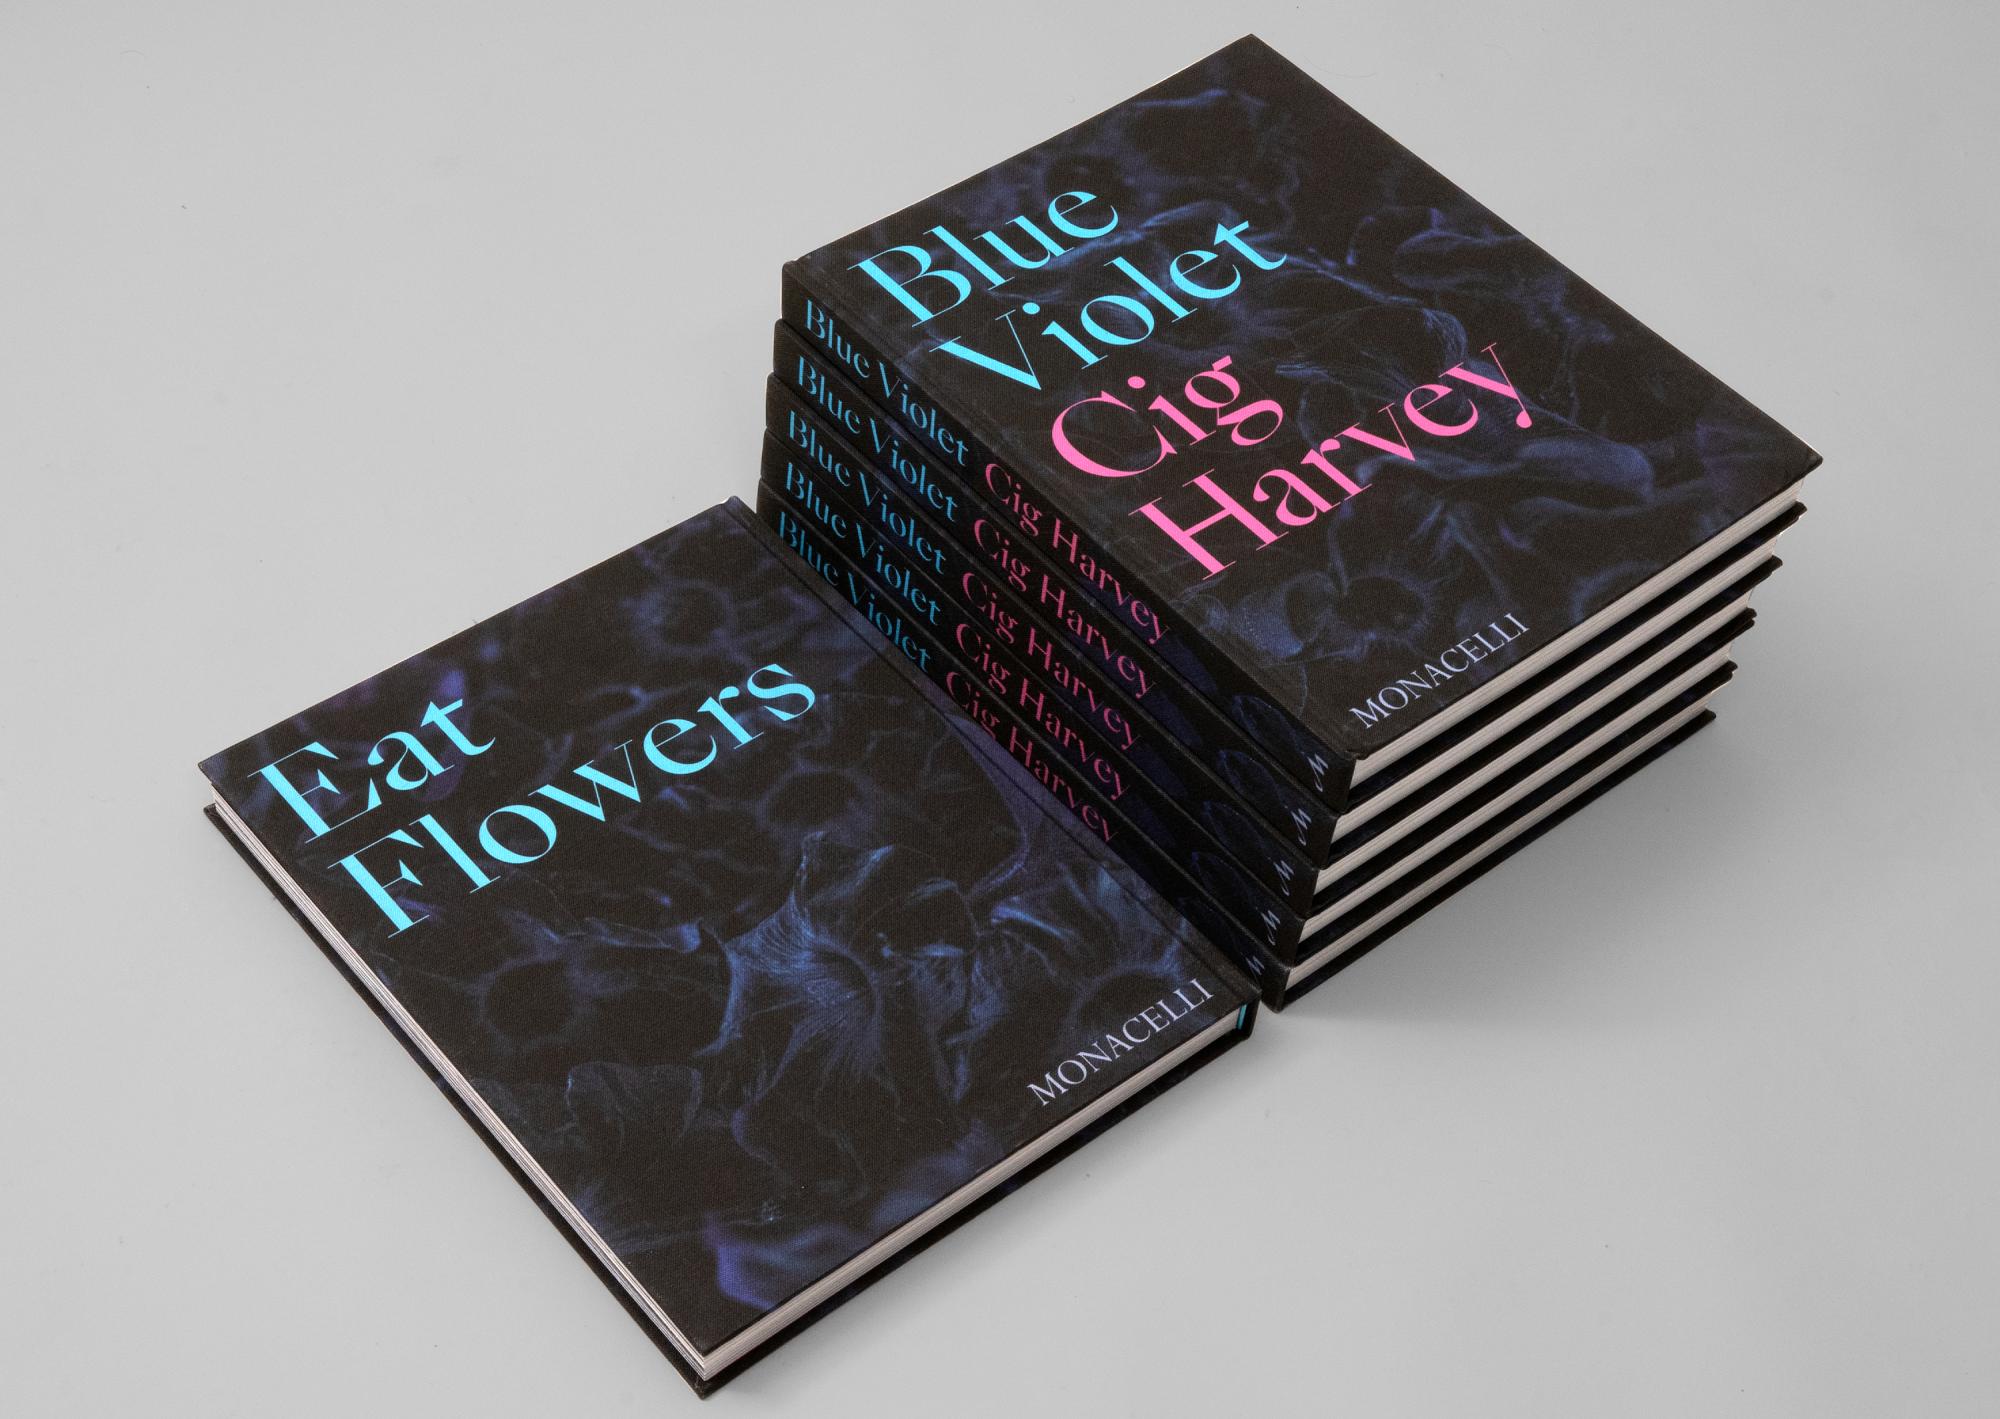 Photo of stack of copies of Blue Violet by Cig Harvey, designed by Professor Jeanette Abbink